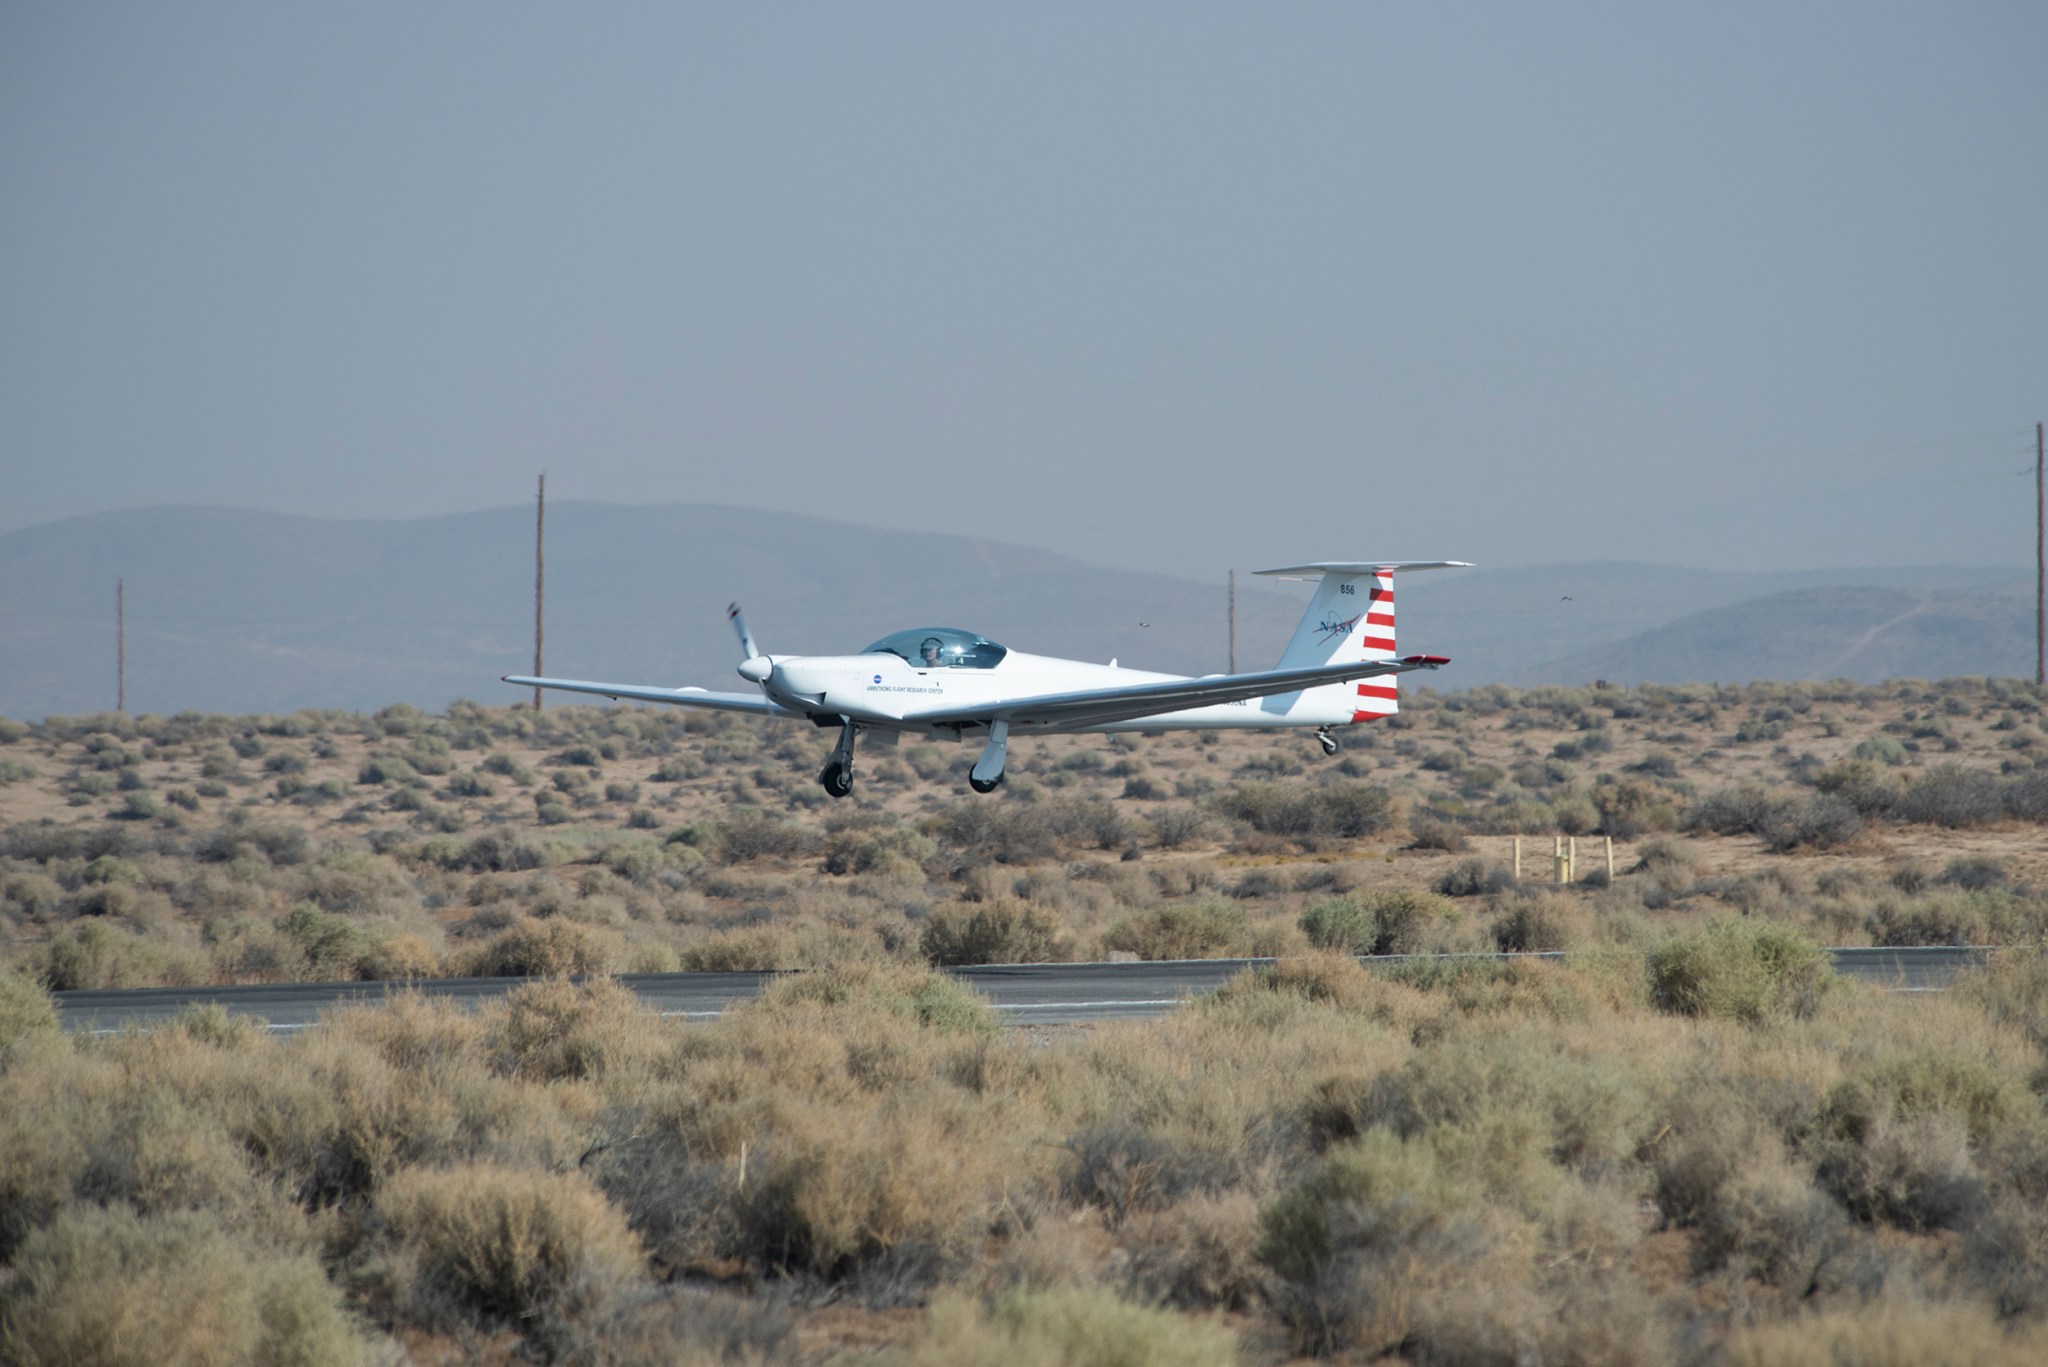 The Advanced Air Mobility National Campaign project conducted connectivity and infrastructure flight tests with a NASA TG-14.